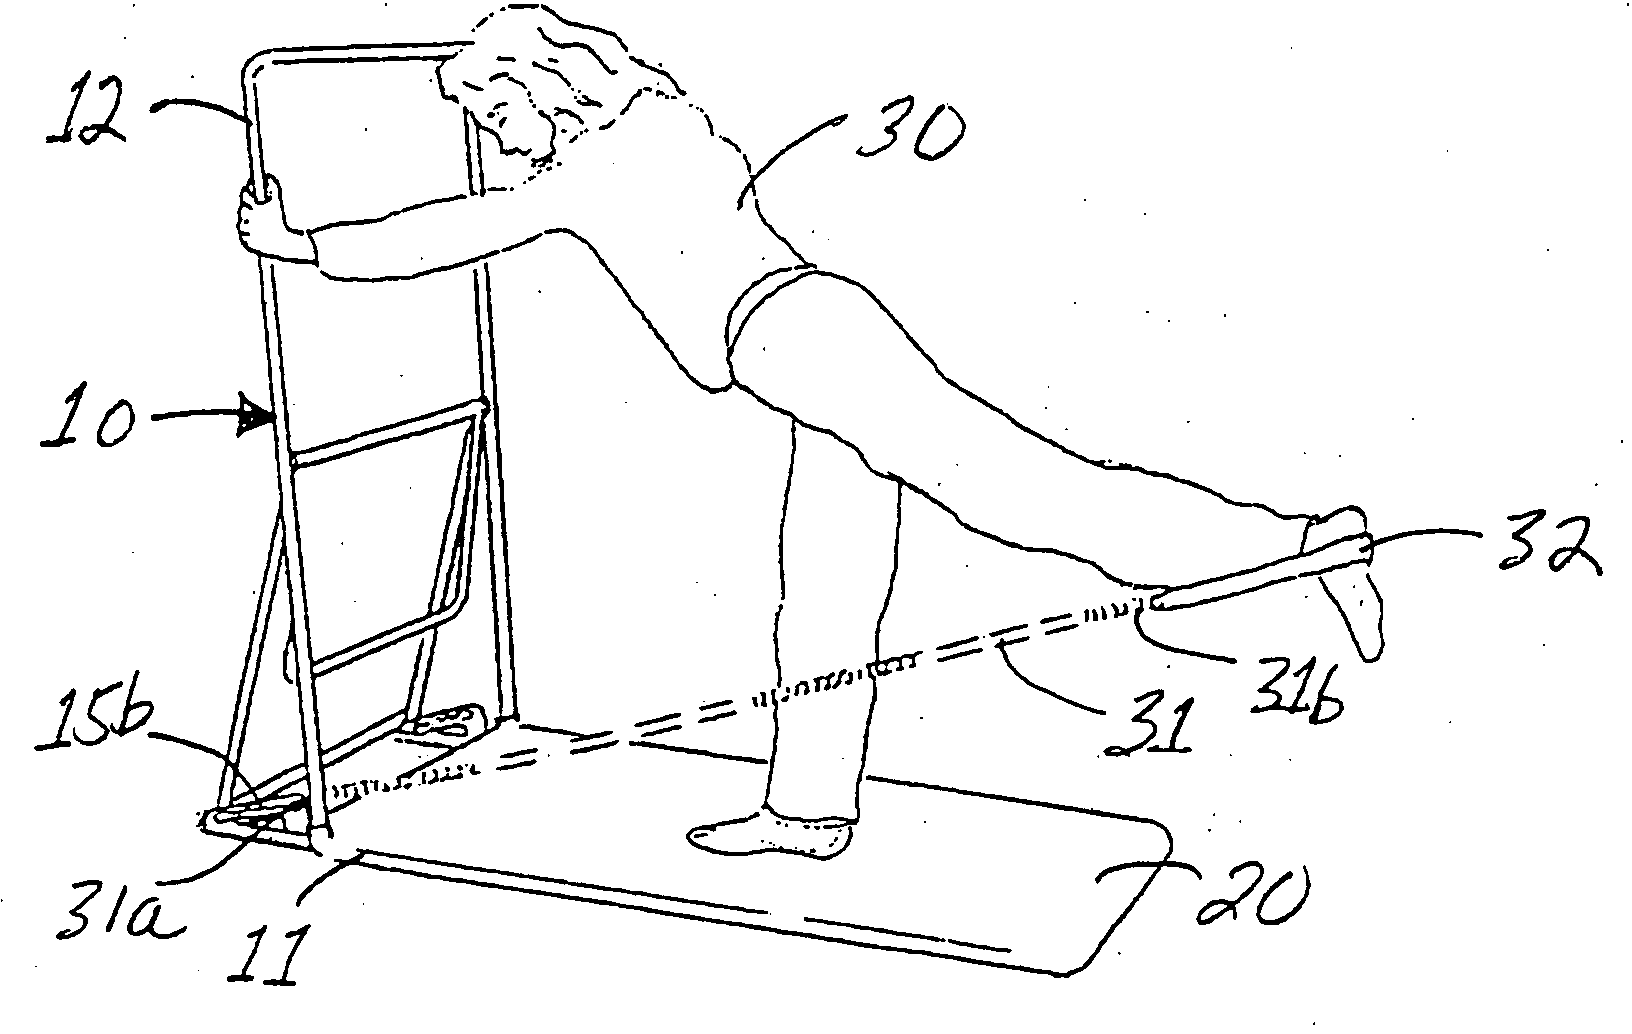 Collapsible resistance exercise device